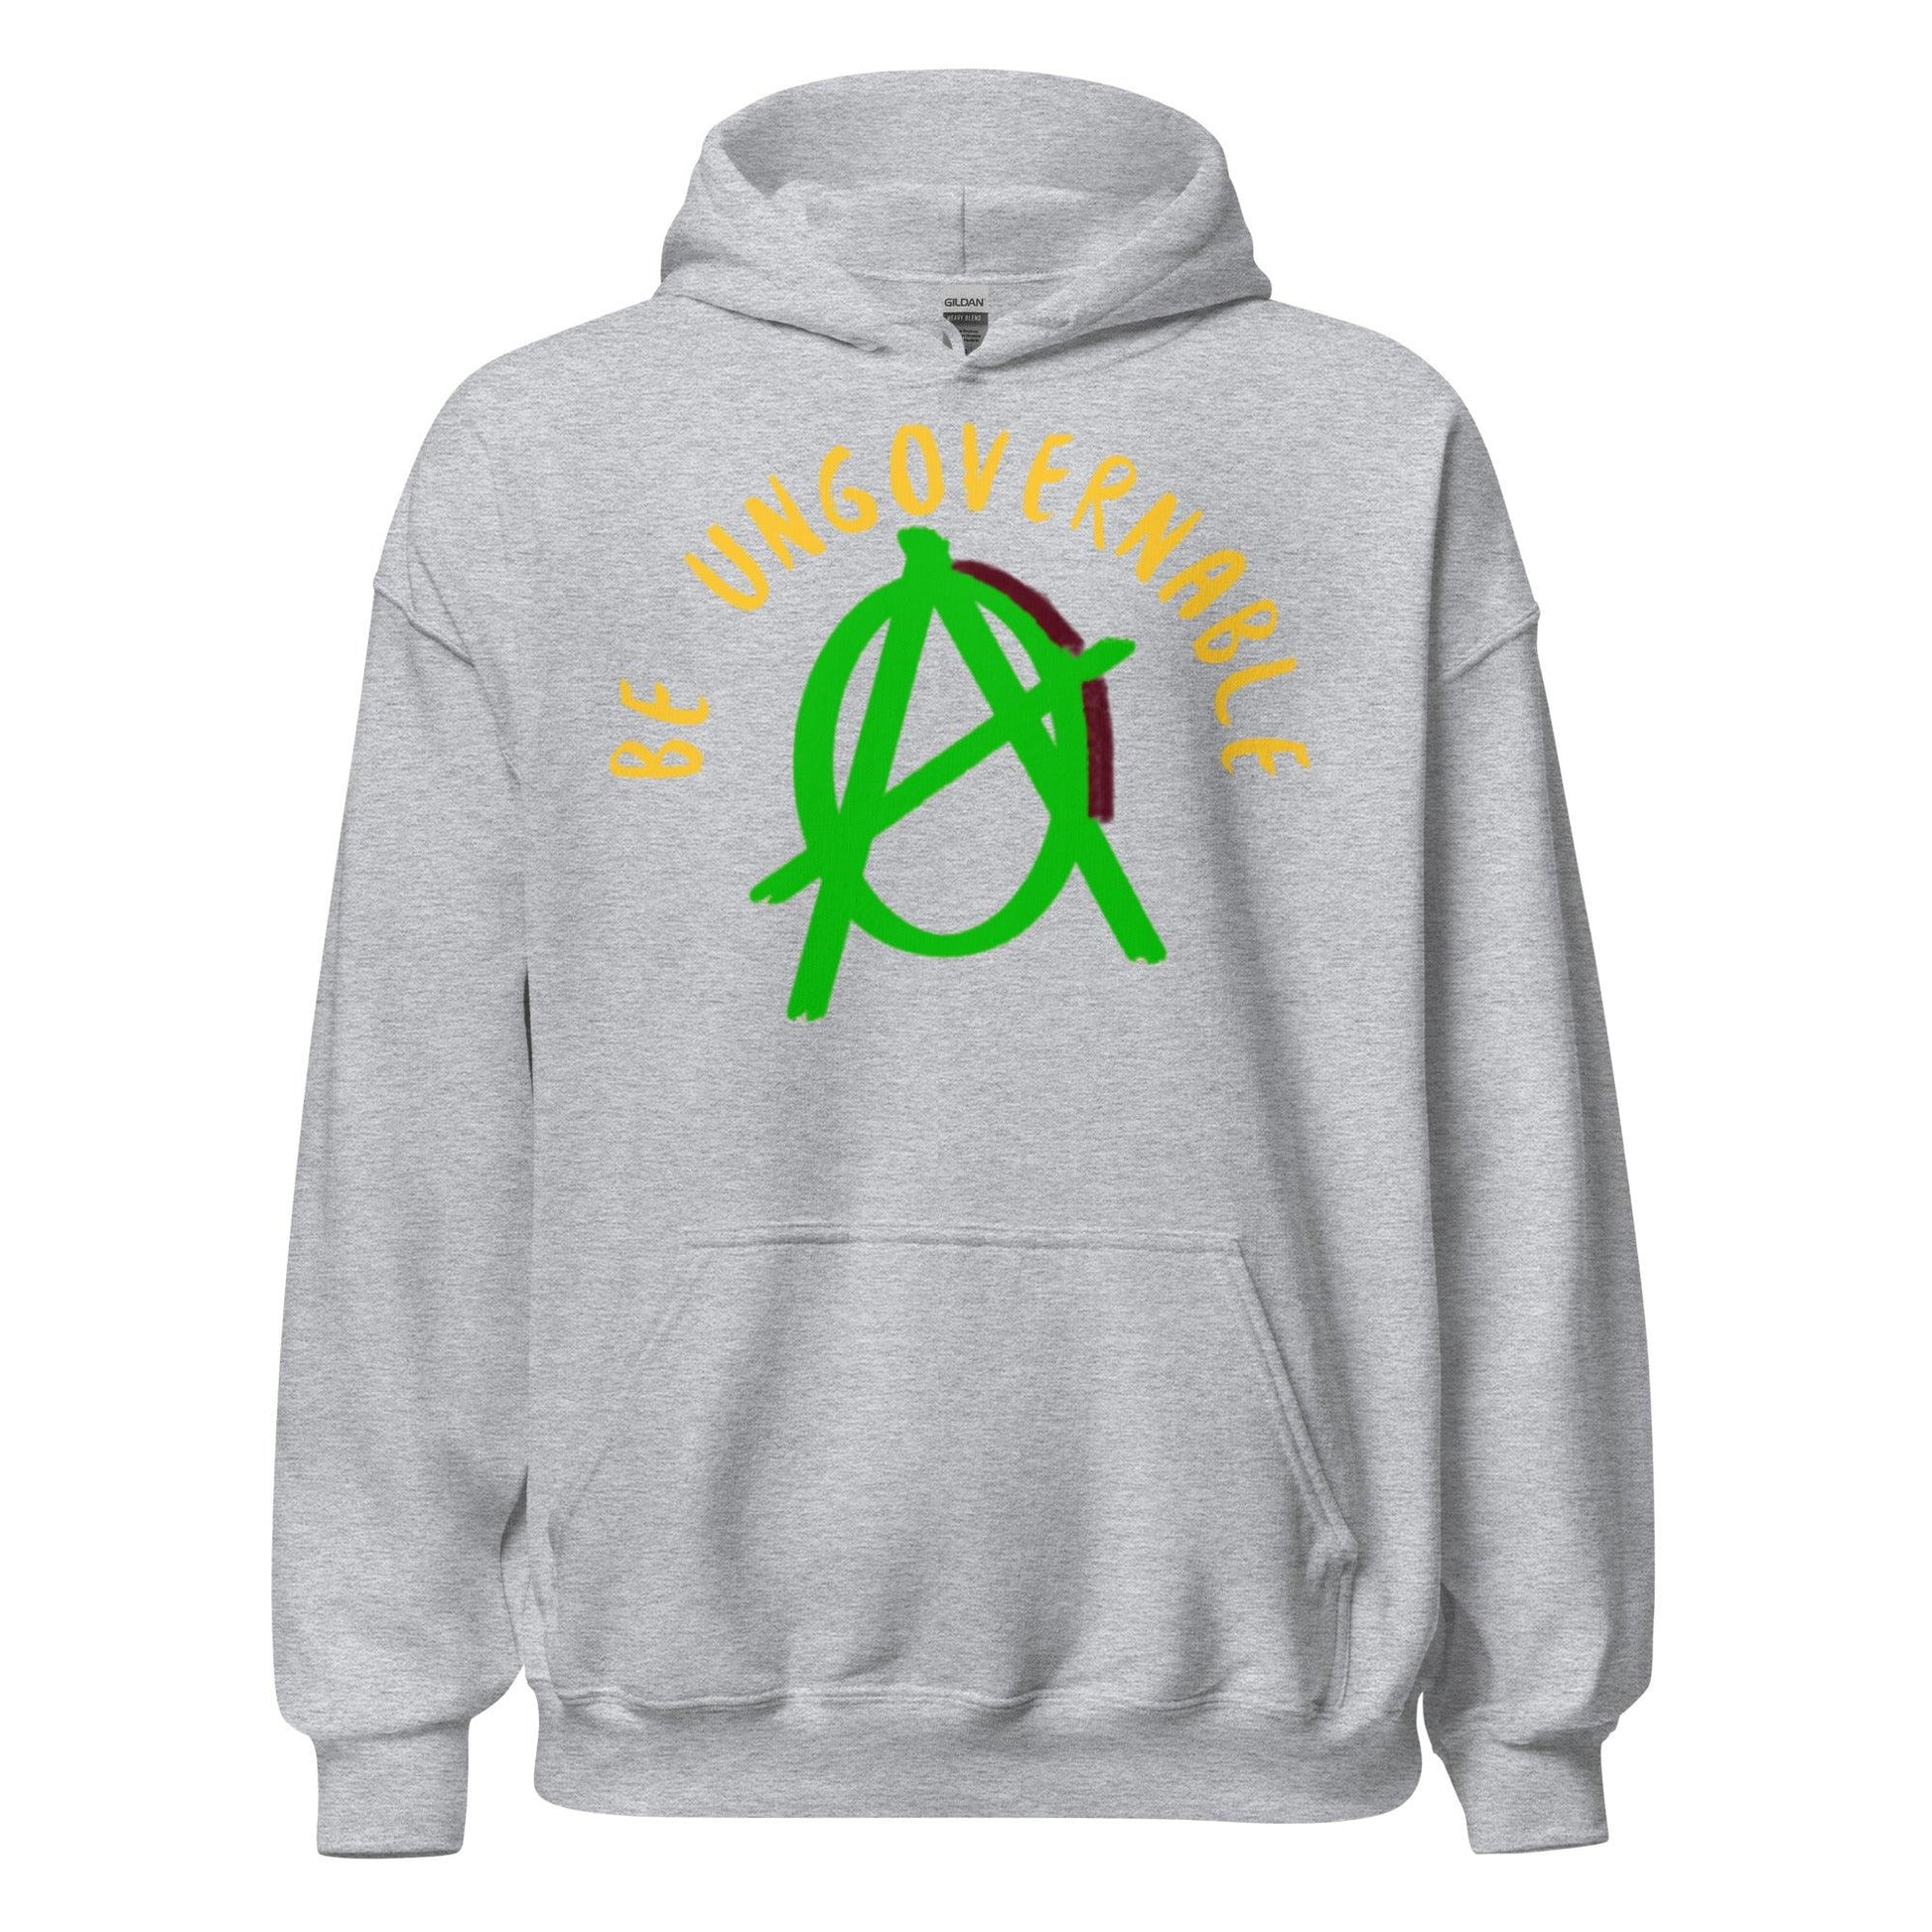 Anarchy Wear Green "Be Ungovernable" Hoodie - AnarchyWear